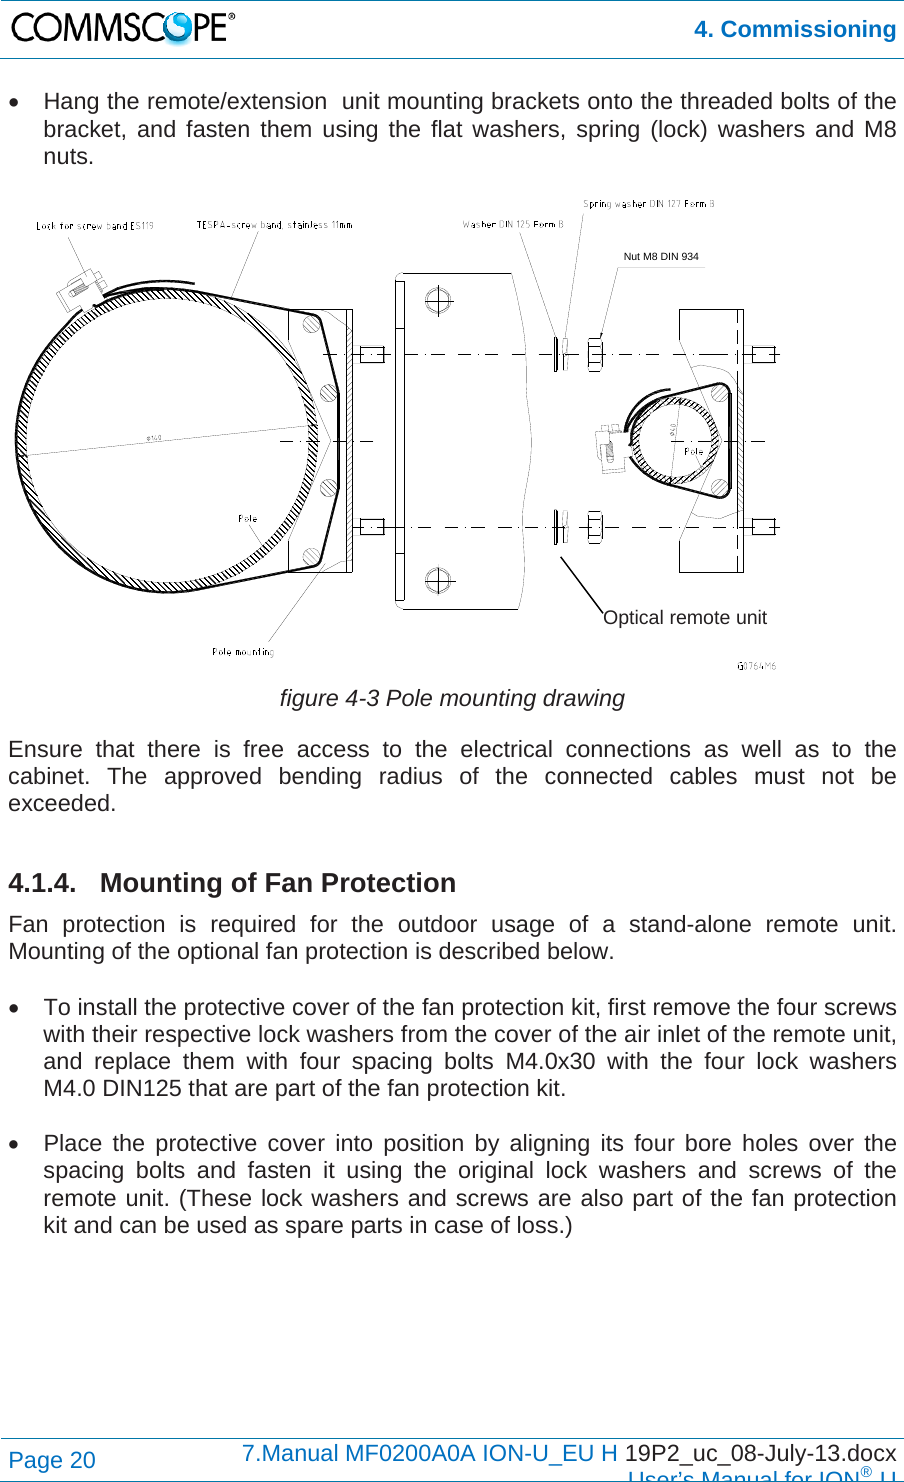  4. Commissioning Page 20  7.Manual MF0200A0A ION-U_EU H 19P2_uc_08-July-13.docx  User’s Manual for ION®U   Hang the remote/extension  unit mounting brackets onto the threaded bolts of the bracket, and fasten them using the flat washers, spring (lock) washers and M8 nuts.   figure 4-3 Pole mounting drawing Ensure that there is free access to the electrical connections as well as to the cabinet. The approved bending radius of the connected cables must not be exceeded.  4.1.4. Mounting of Fan Protection Fan protection is required for the outdoor usage of a stand-alone remote unit. Mounting of the optional fan protection is described below.    To install the protective cover of the fan protection kit, first remove the four screws with their respective lock washers from the cover of the air inlet of the remote unit, and replace them with four spacing bolts M4.0x30 with the four lock washers M4.0 DIN125 that are part of the fan protection kit.    Place the protective cover into position by aligning its four bore holes over the spacing bolts and fasten it using the original lock washers and screws of the remote unit. (These lock washers and screws are also part of the fan protection kit and can be used as spare parts in case of loss.)  Nut M8 DIN 934Optical remote unit 